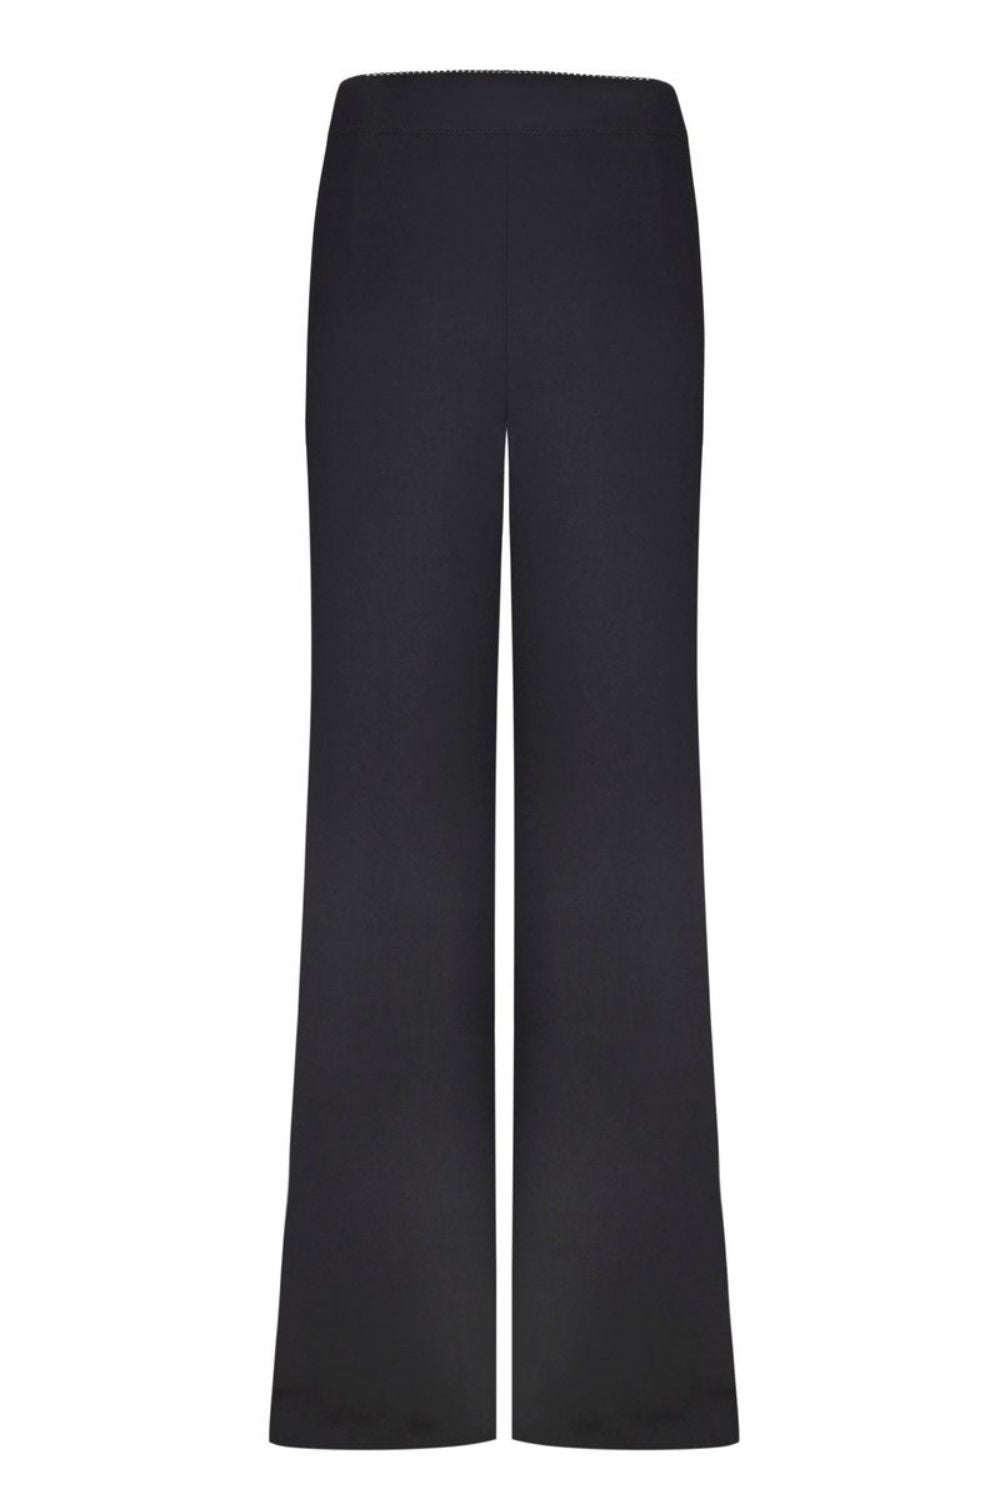 Wide Leg Trousers | Women's Embroidered & Flared | NA-KD